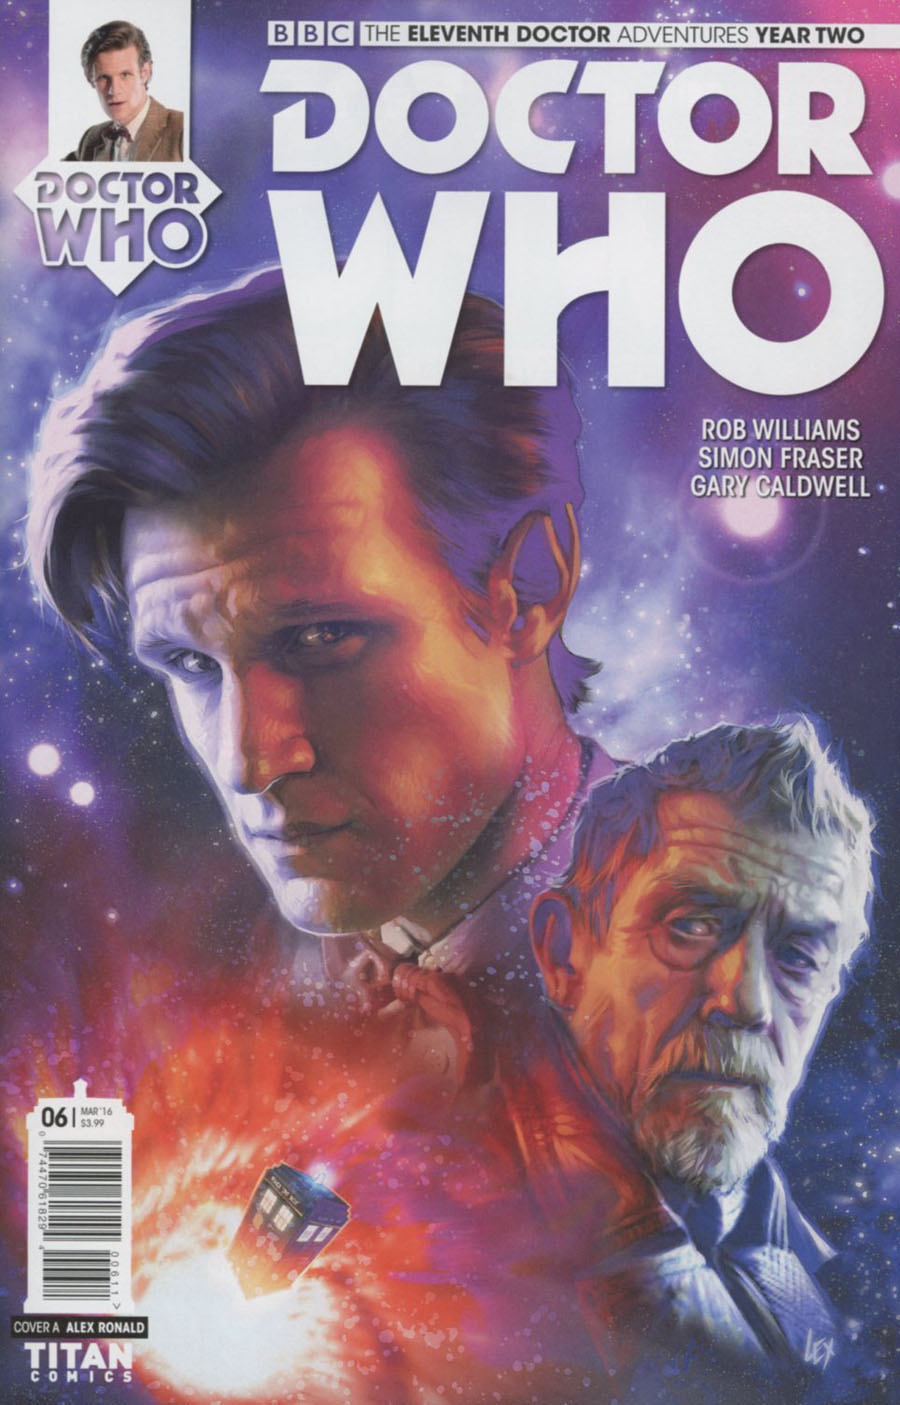 Doctor Who 11th Doctor Year Two #6 Cover A Regular Alex Ronald Cover